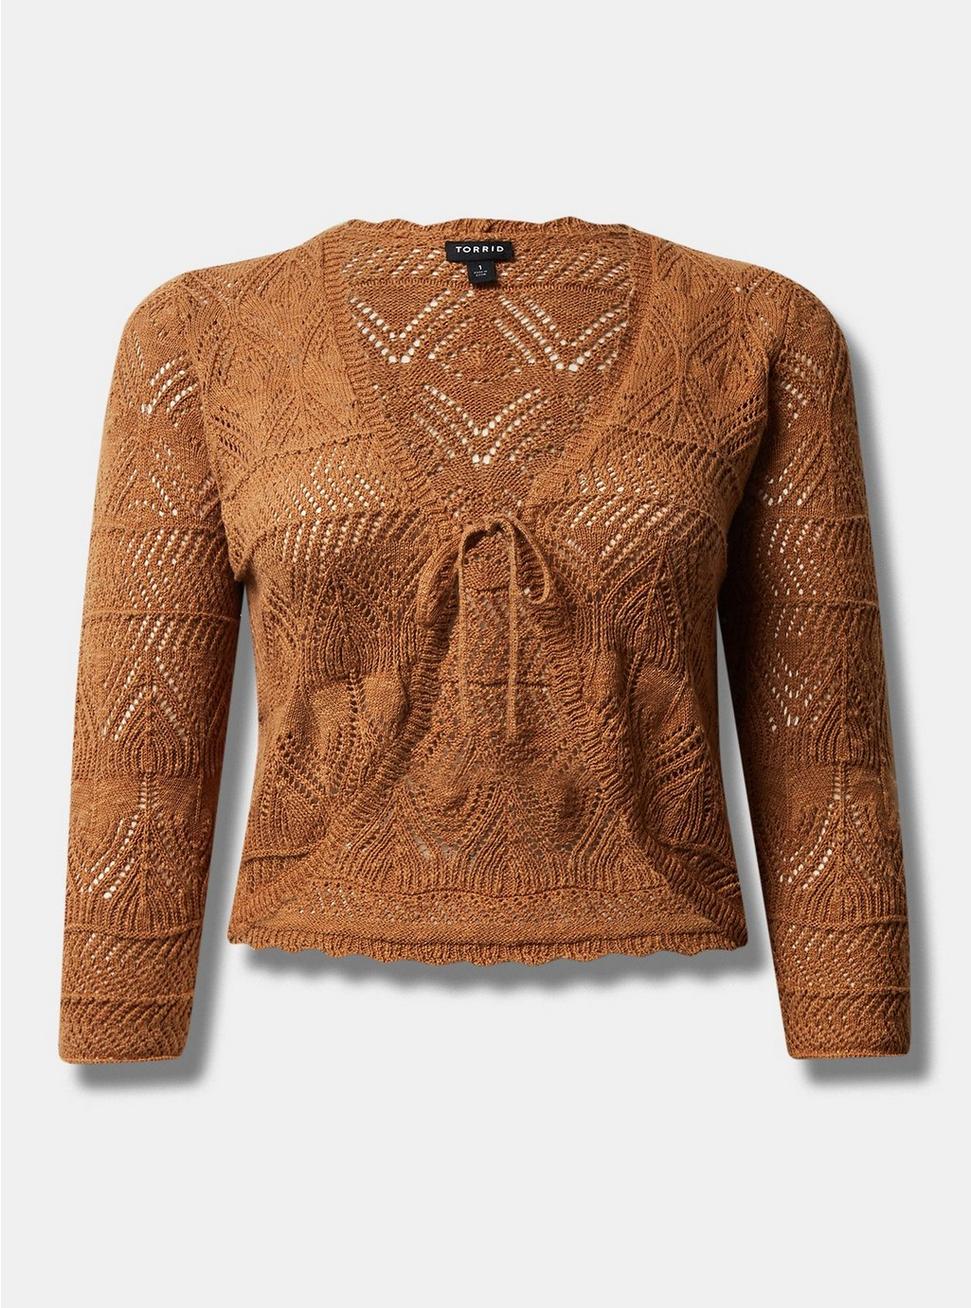 Pointelle Tie Front Shrug Sweater, TOBACCO BROWN, hi-res